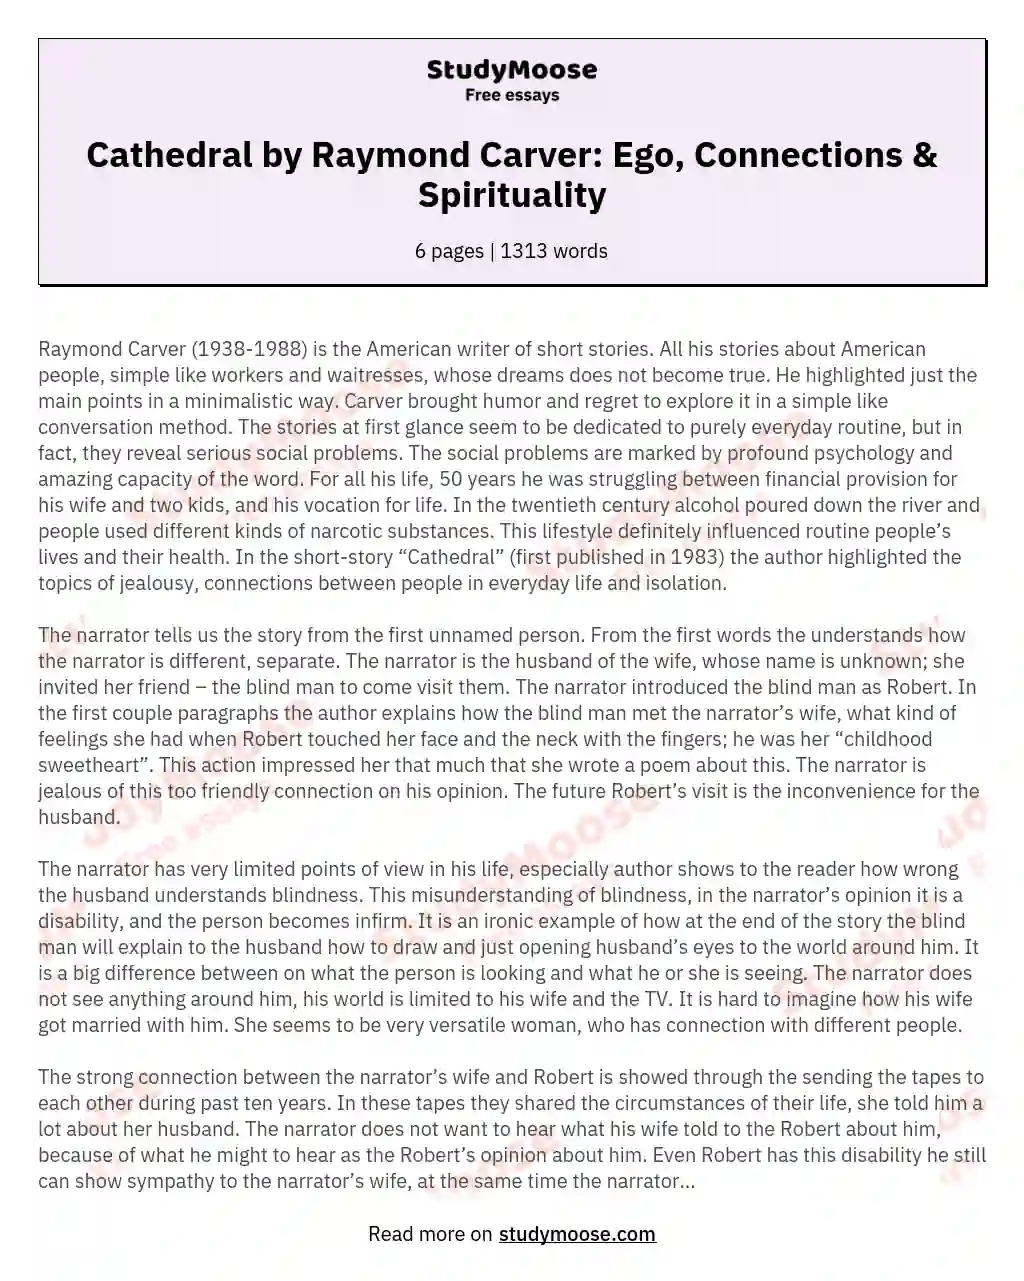 Cathedral by Raymond Carver: Ego, Connections & Spirituality essay